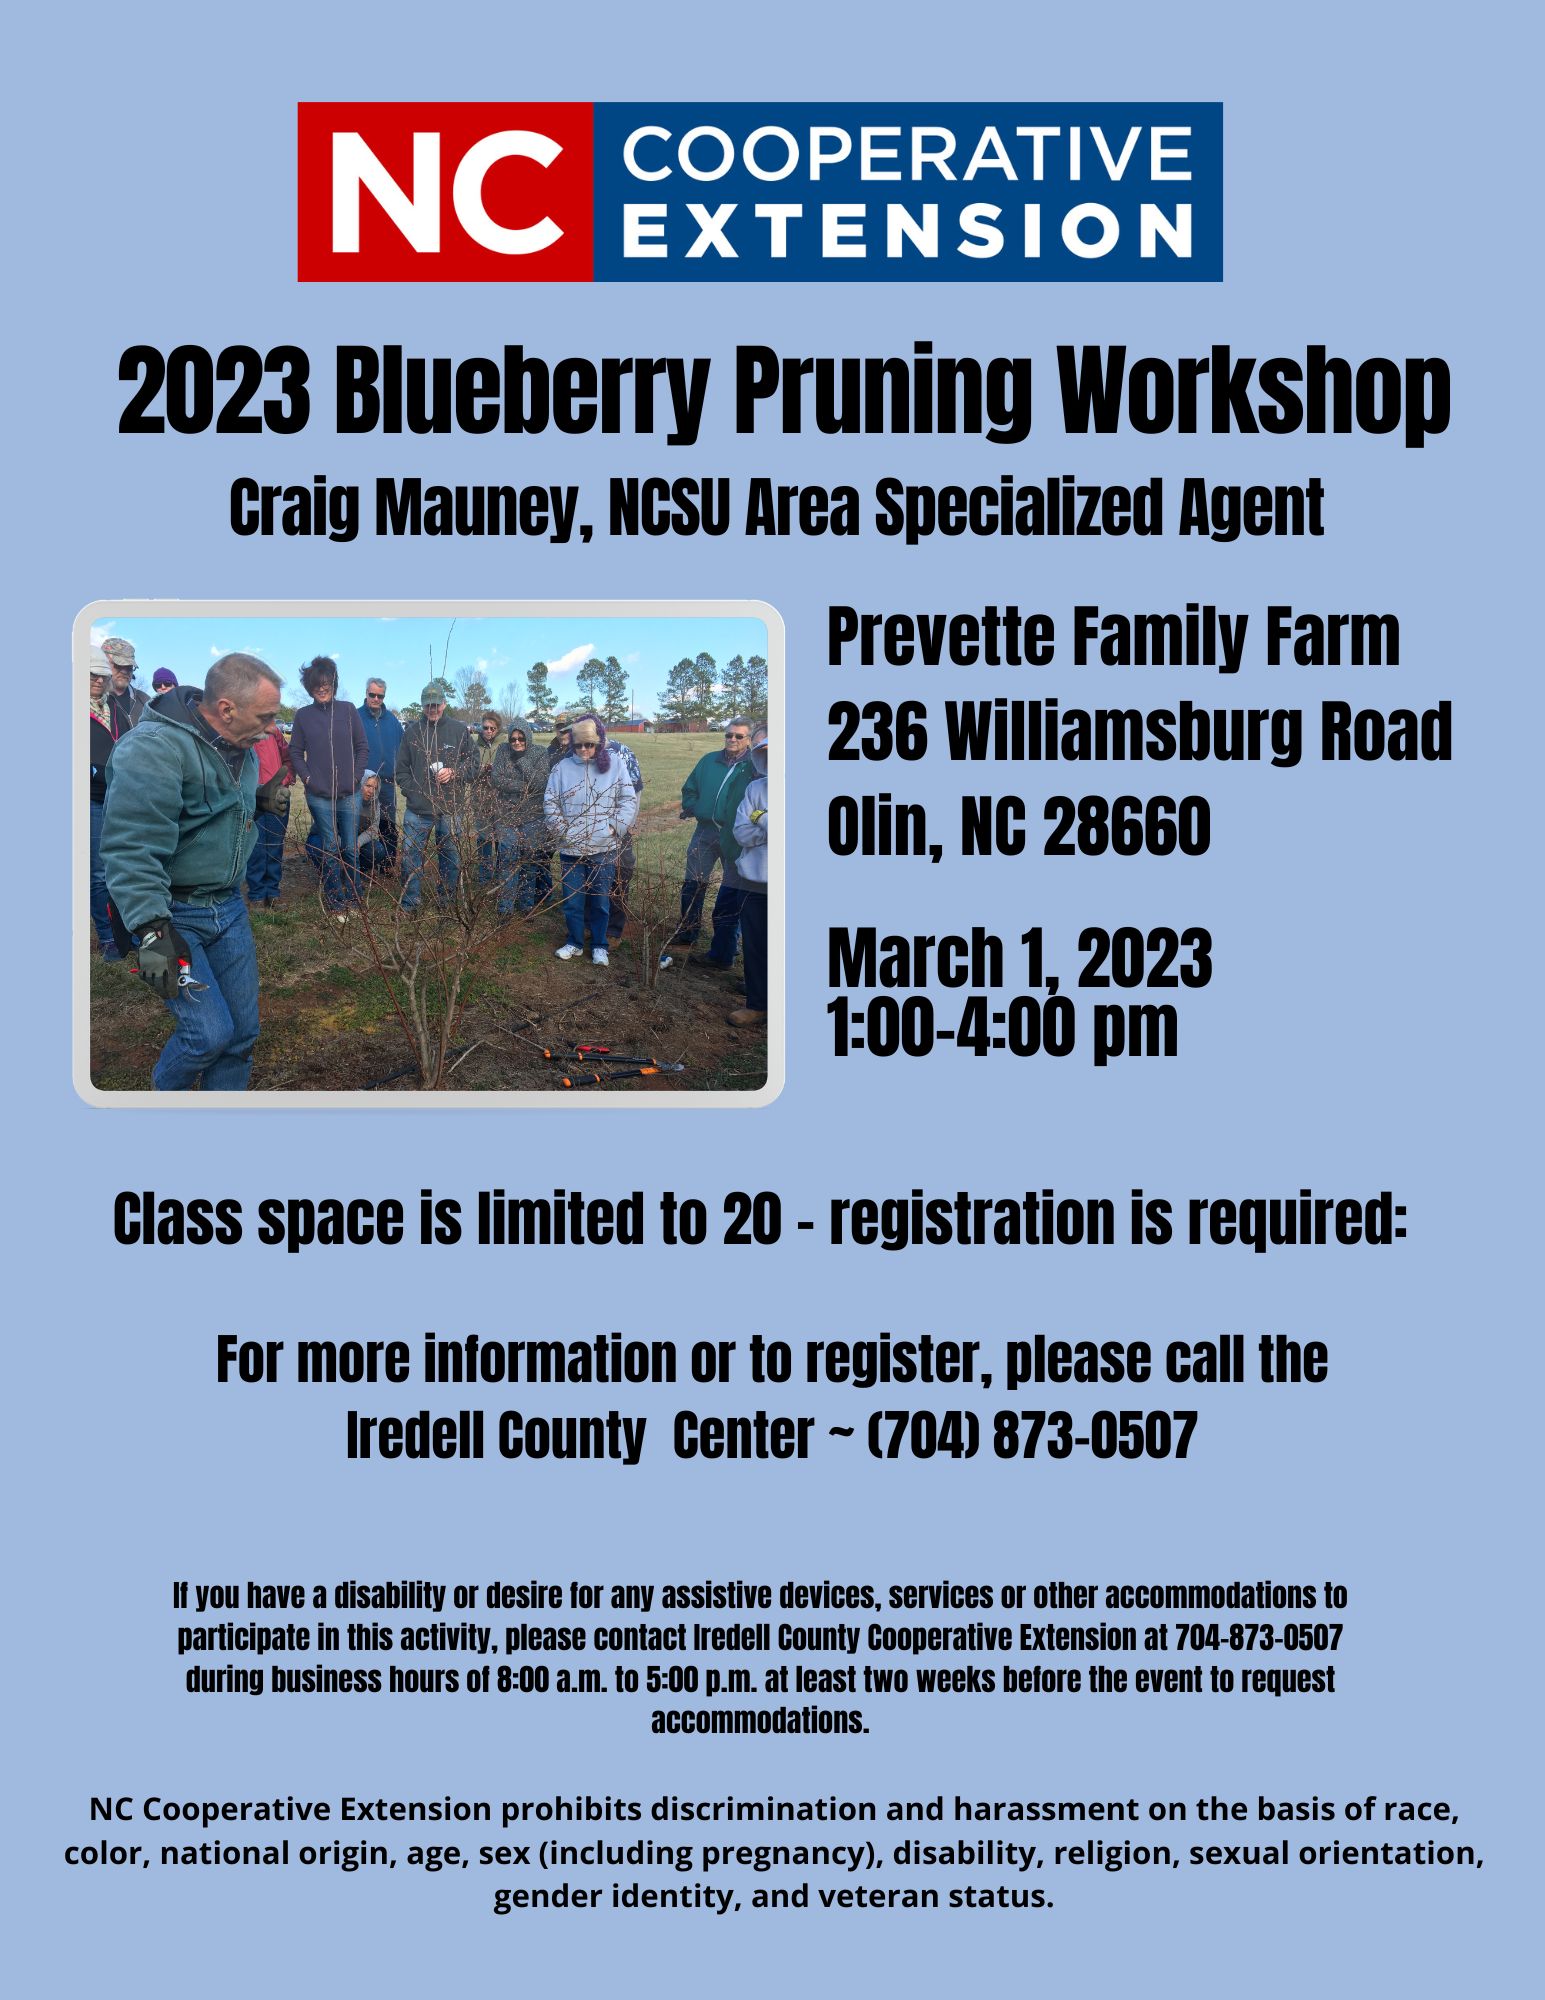 Join us at Prevette Family Farm on March 1, 2023 for our annual blueberry pruning workshop. Blueberries can be a profitable, specialty crop that commercial and backyard growers can produce successfully. Participants will be guided through the pruning decision making process as well as discuss production aspects of blueberries. Participants will gain hands-on knowledge of proper pruning techniques to maximize disease prevention and insect control, thus maximizing plant health and productivity.